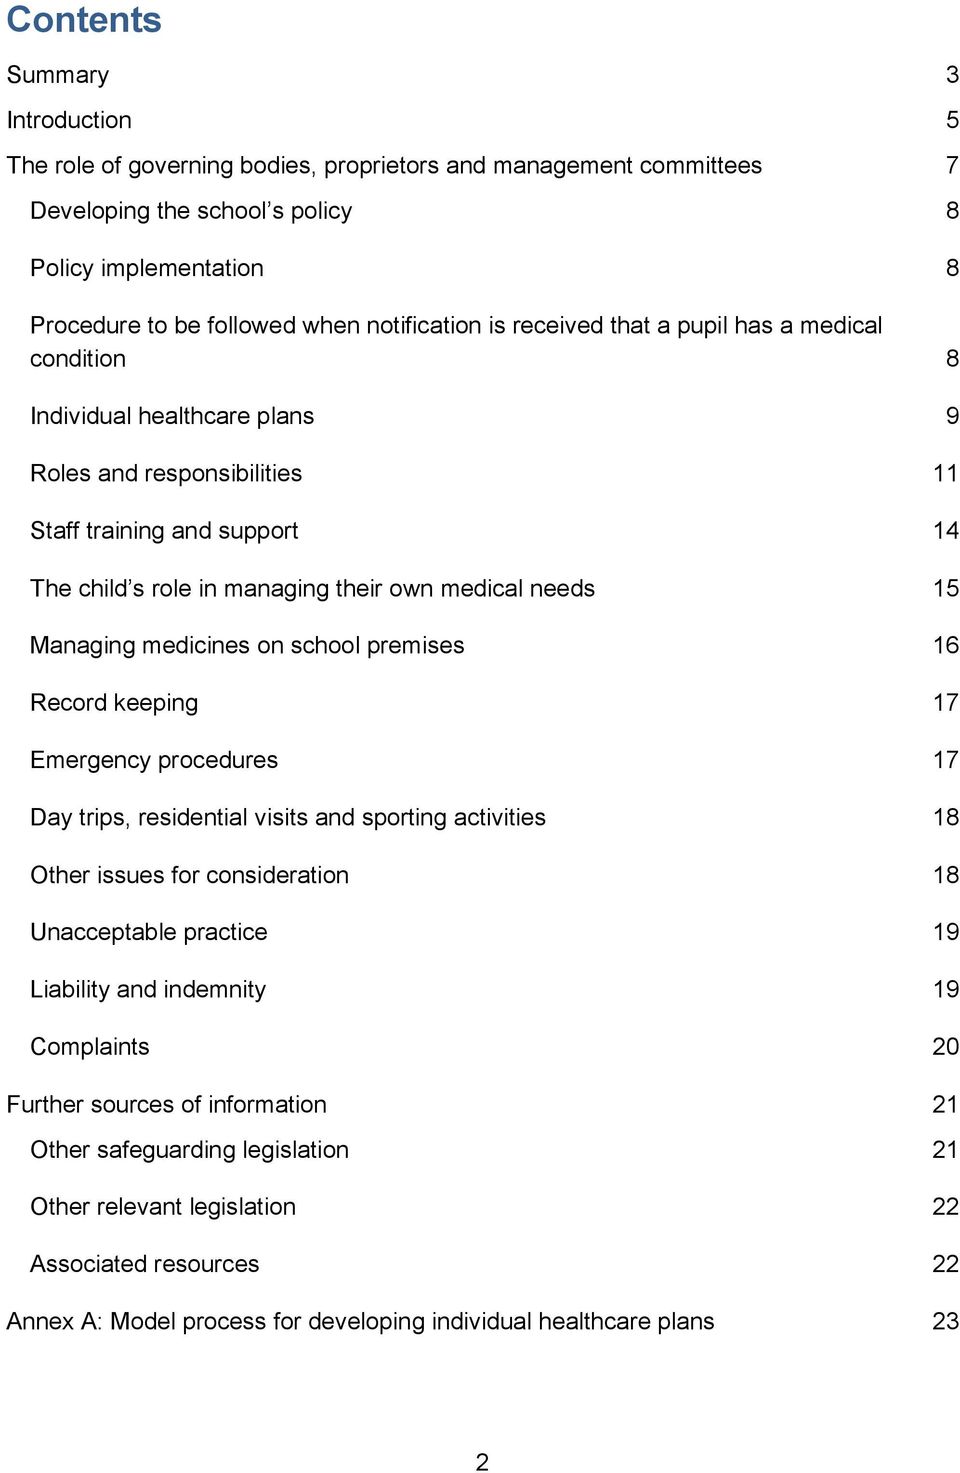 medical needs 15 Managing medicines on school premises 16 Record keeping 17 Emergency procedures 17 Day trips, residential visits and sporting activities 18 Other issues for consideration 18